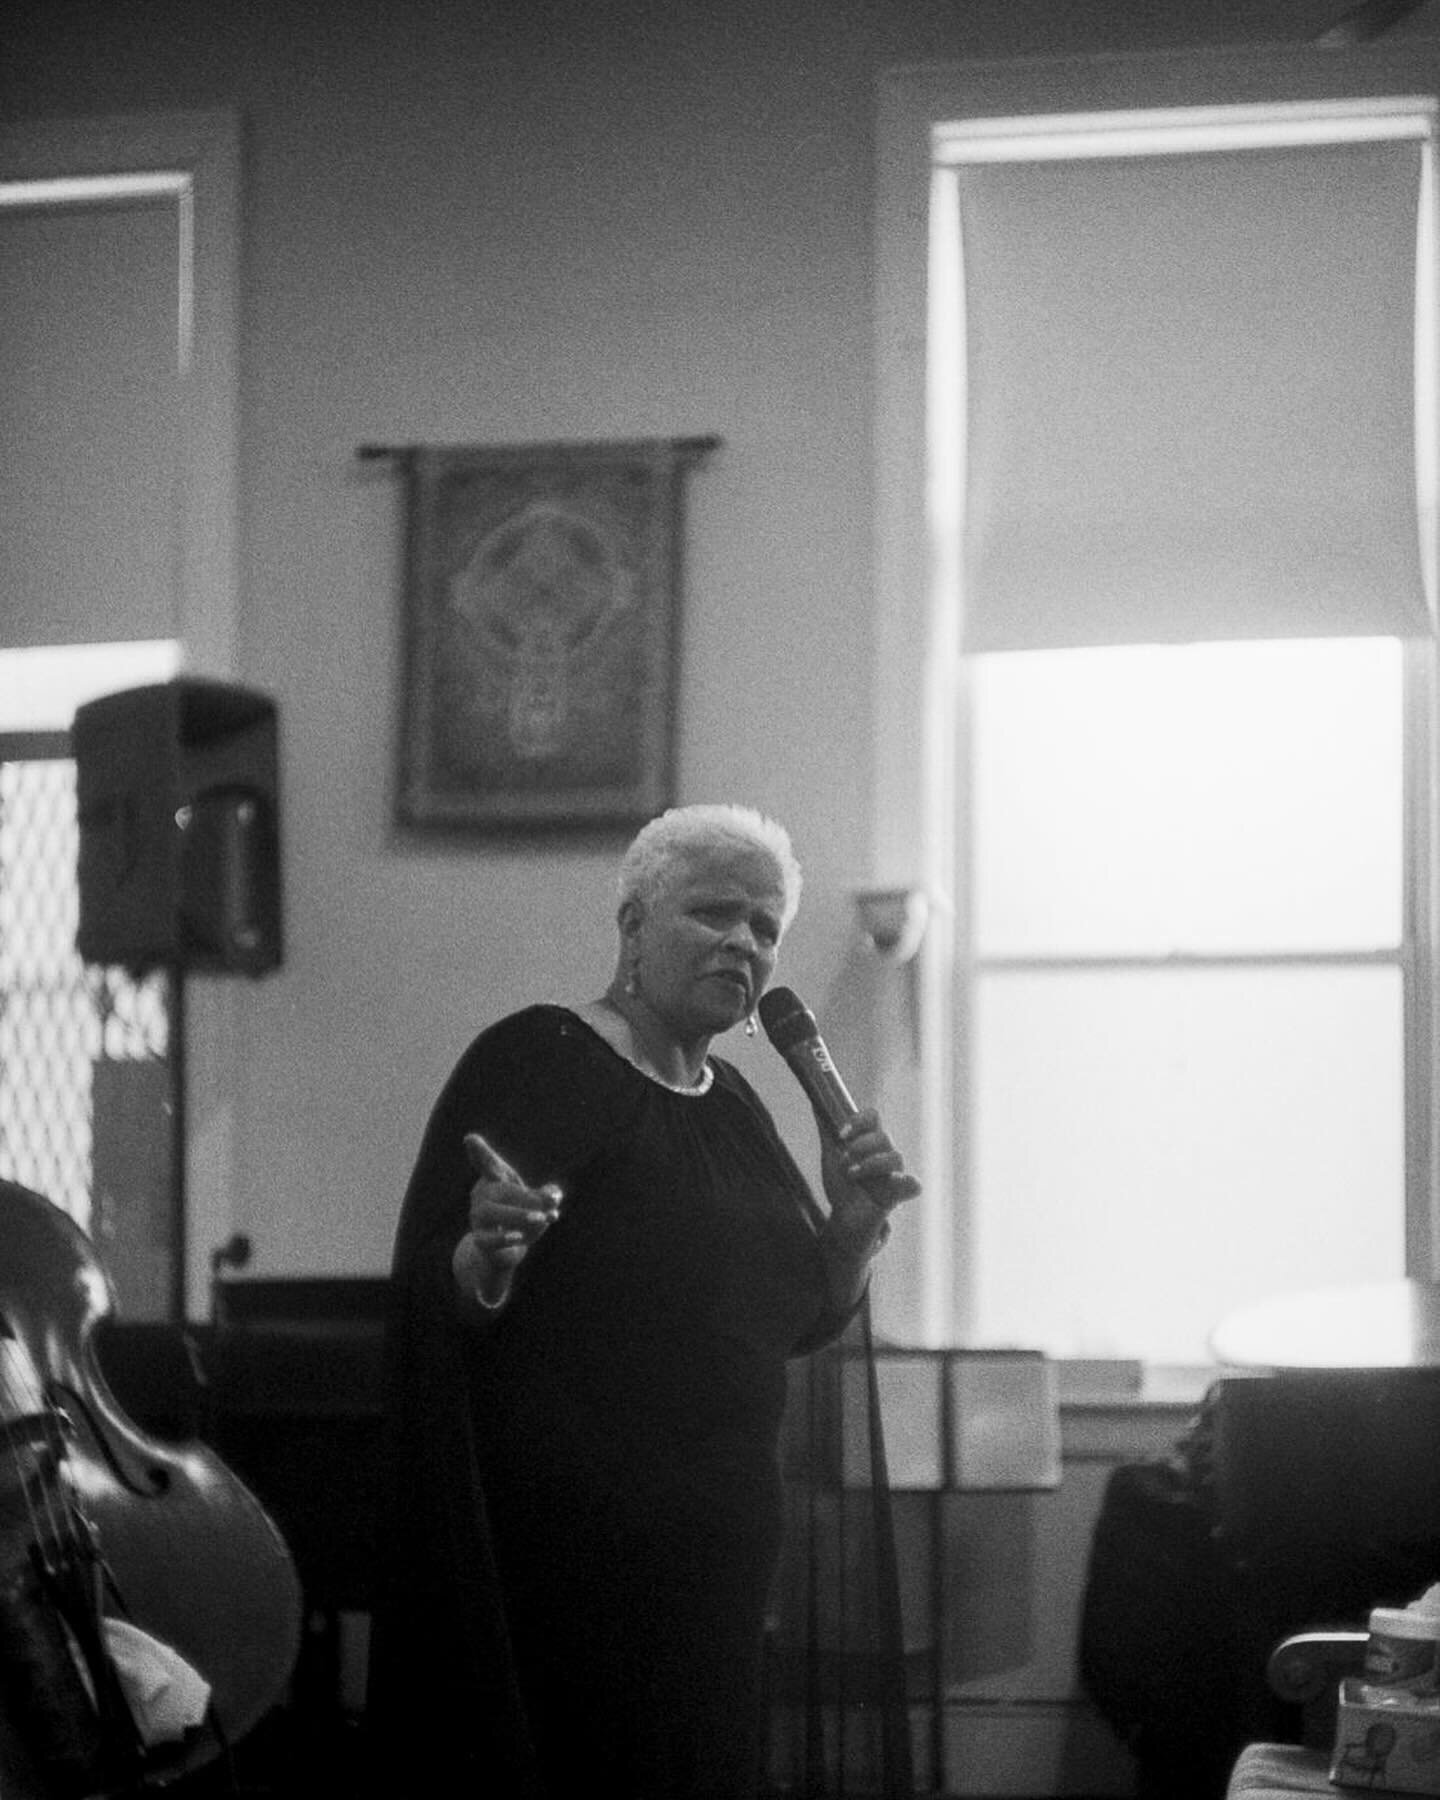 Shot on a real 1950s Leica M3 camera, and developed in a darkroom: These images by local photographer Richard Hernandez @articfox_nyc make you feel like you were there for the jazz, blues and gospel concert we organized at Elmendorf Reformed Church, 